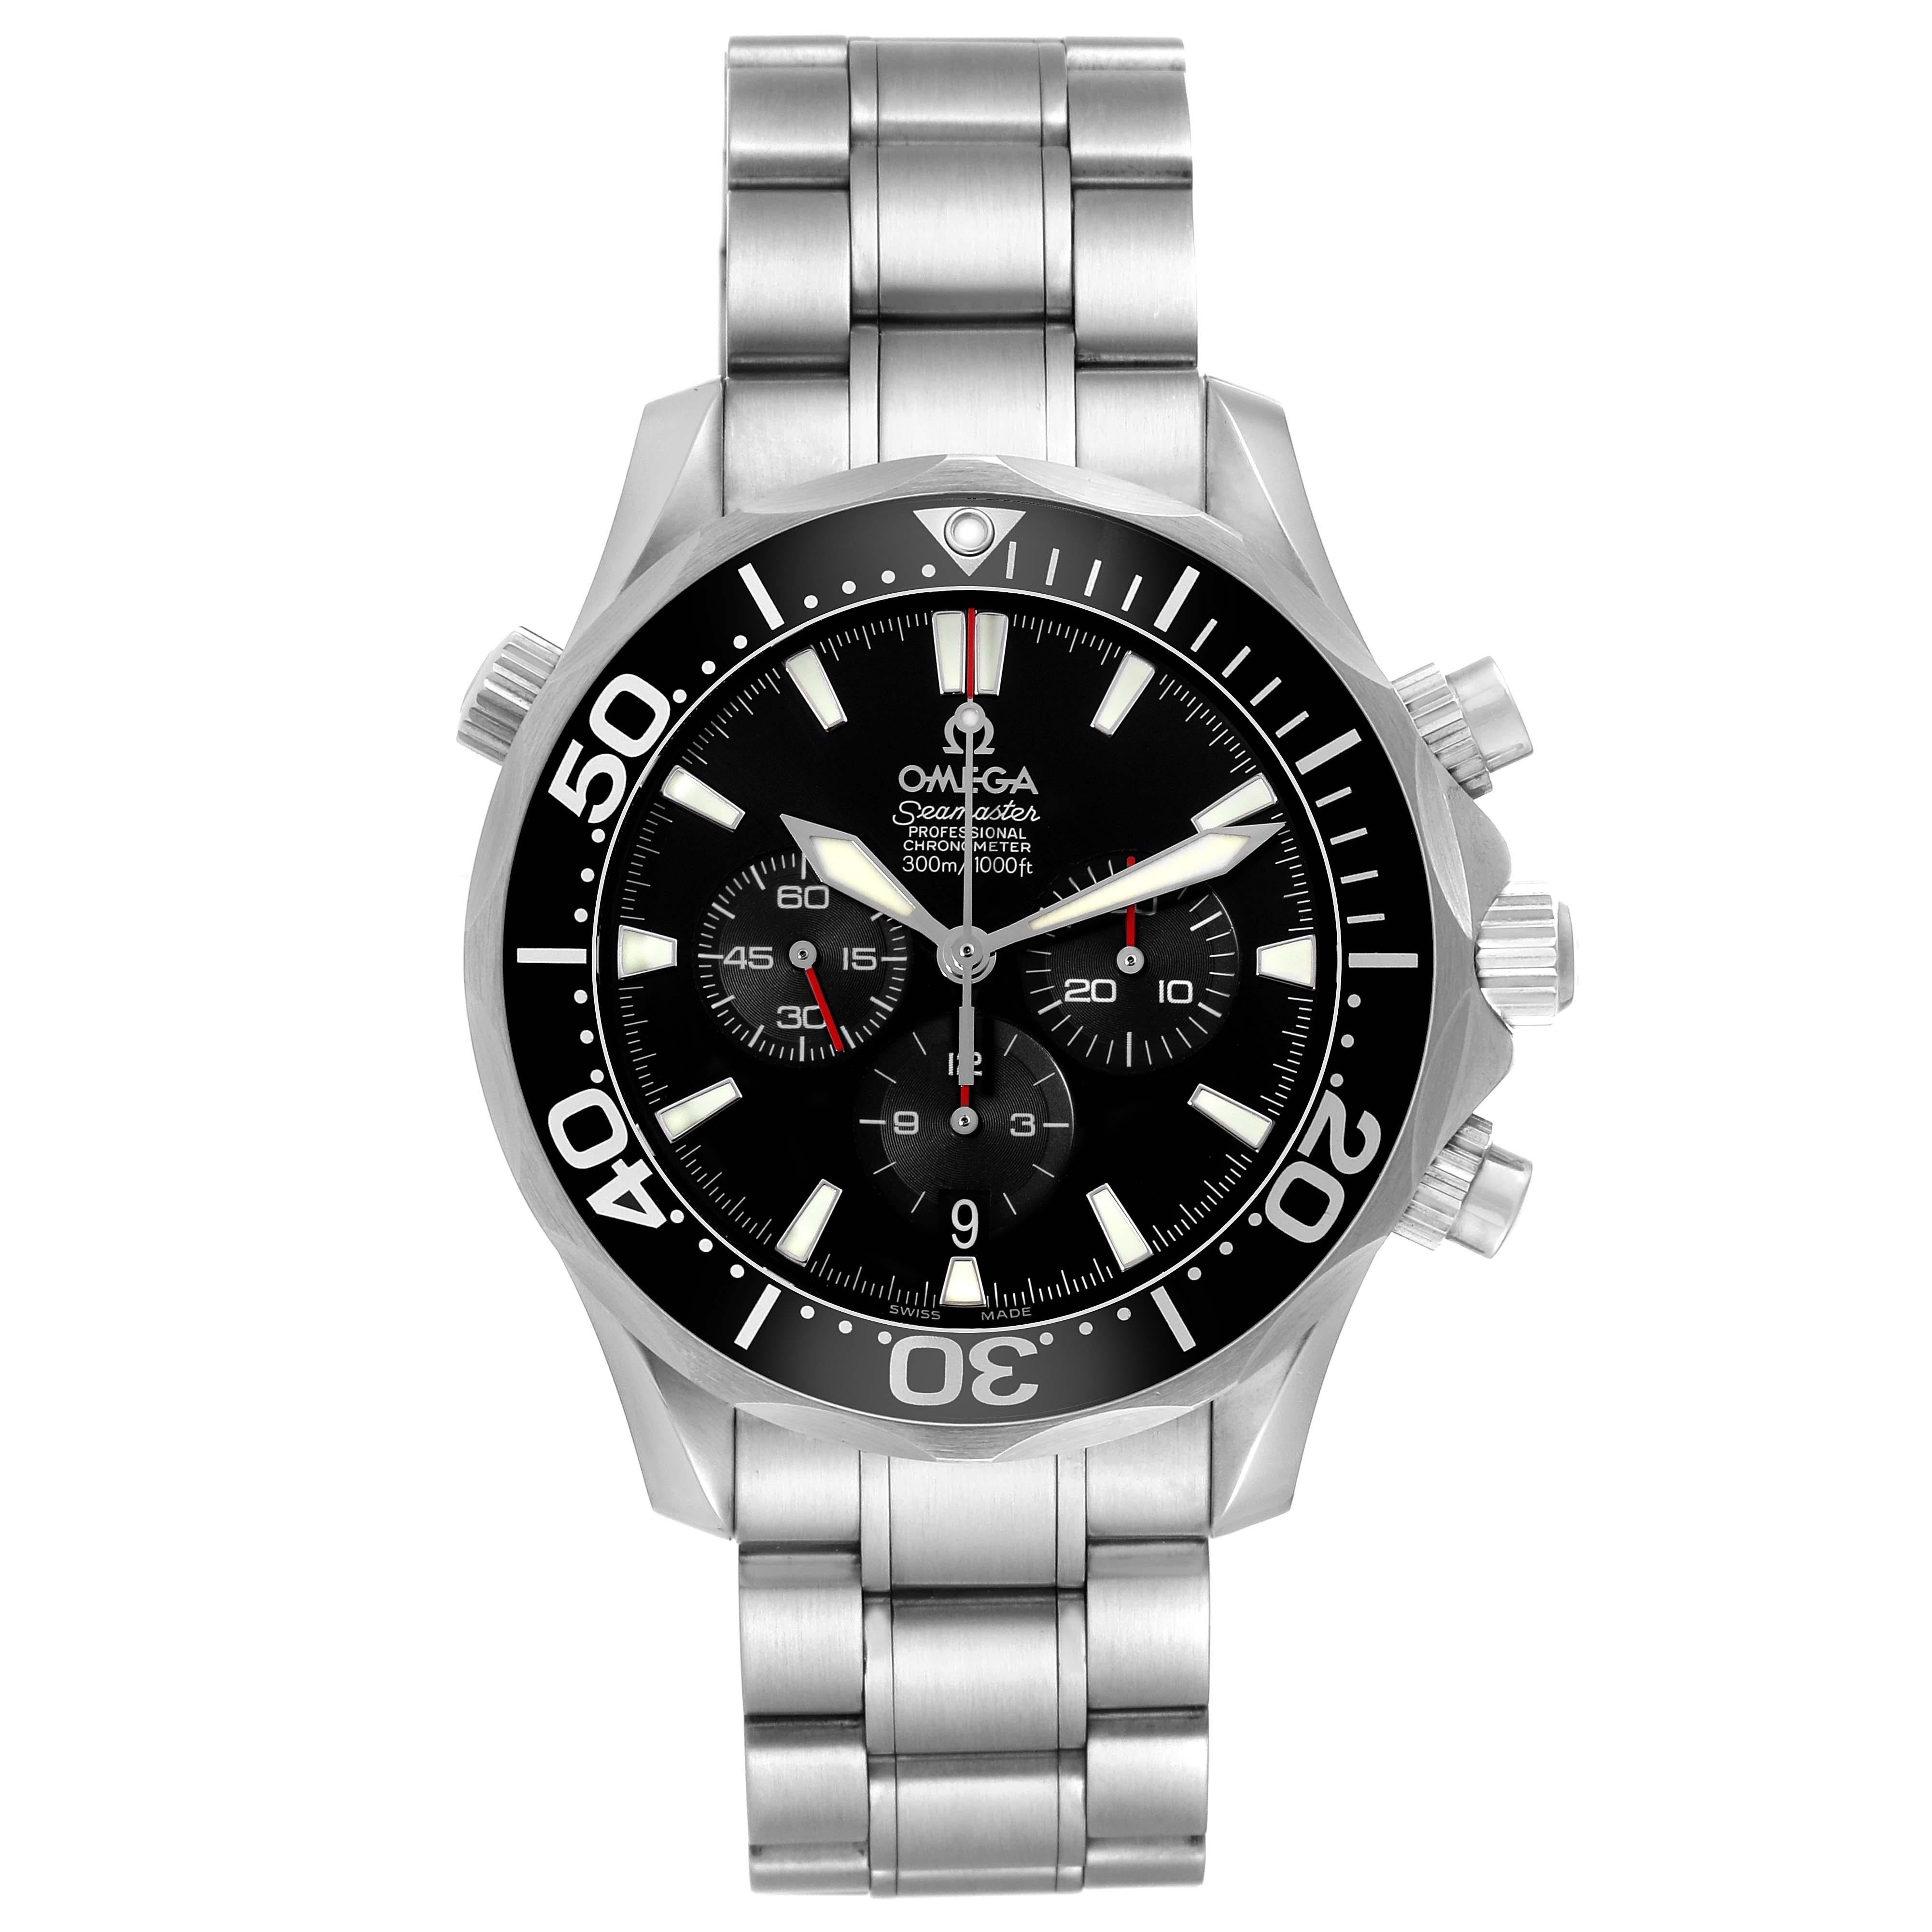 Omega Seamaster Chronograph Black Dial Steel Mens Watch 2594.52.00 Box Card. Automatic self-winding chronograph movement. Stainless steel round case 41.5 mm in diameter. Black unidirectional rotating bezel. Scratch resistant sapphire crystal. Black